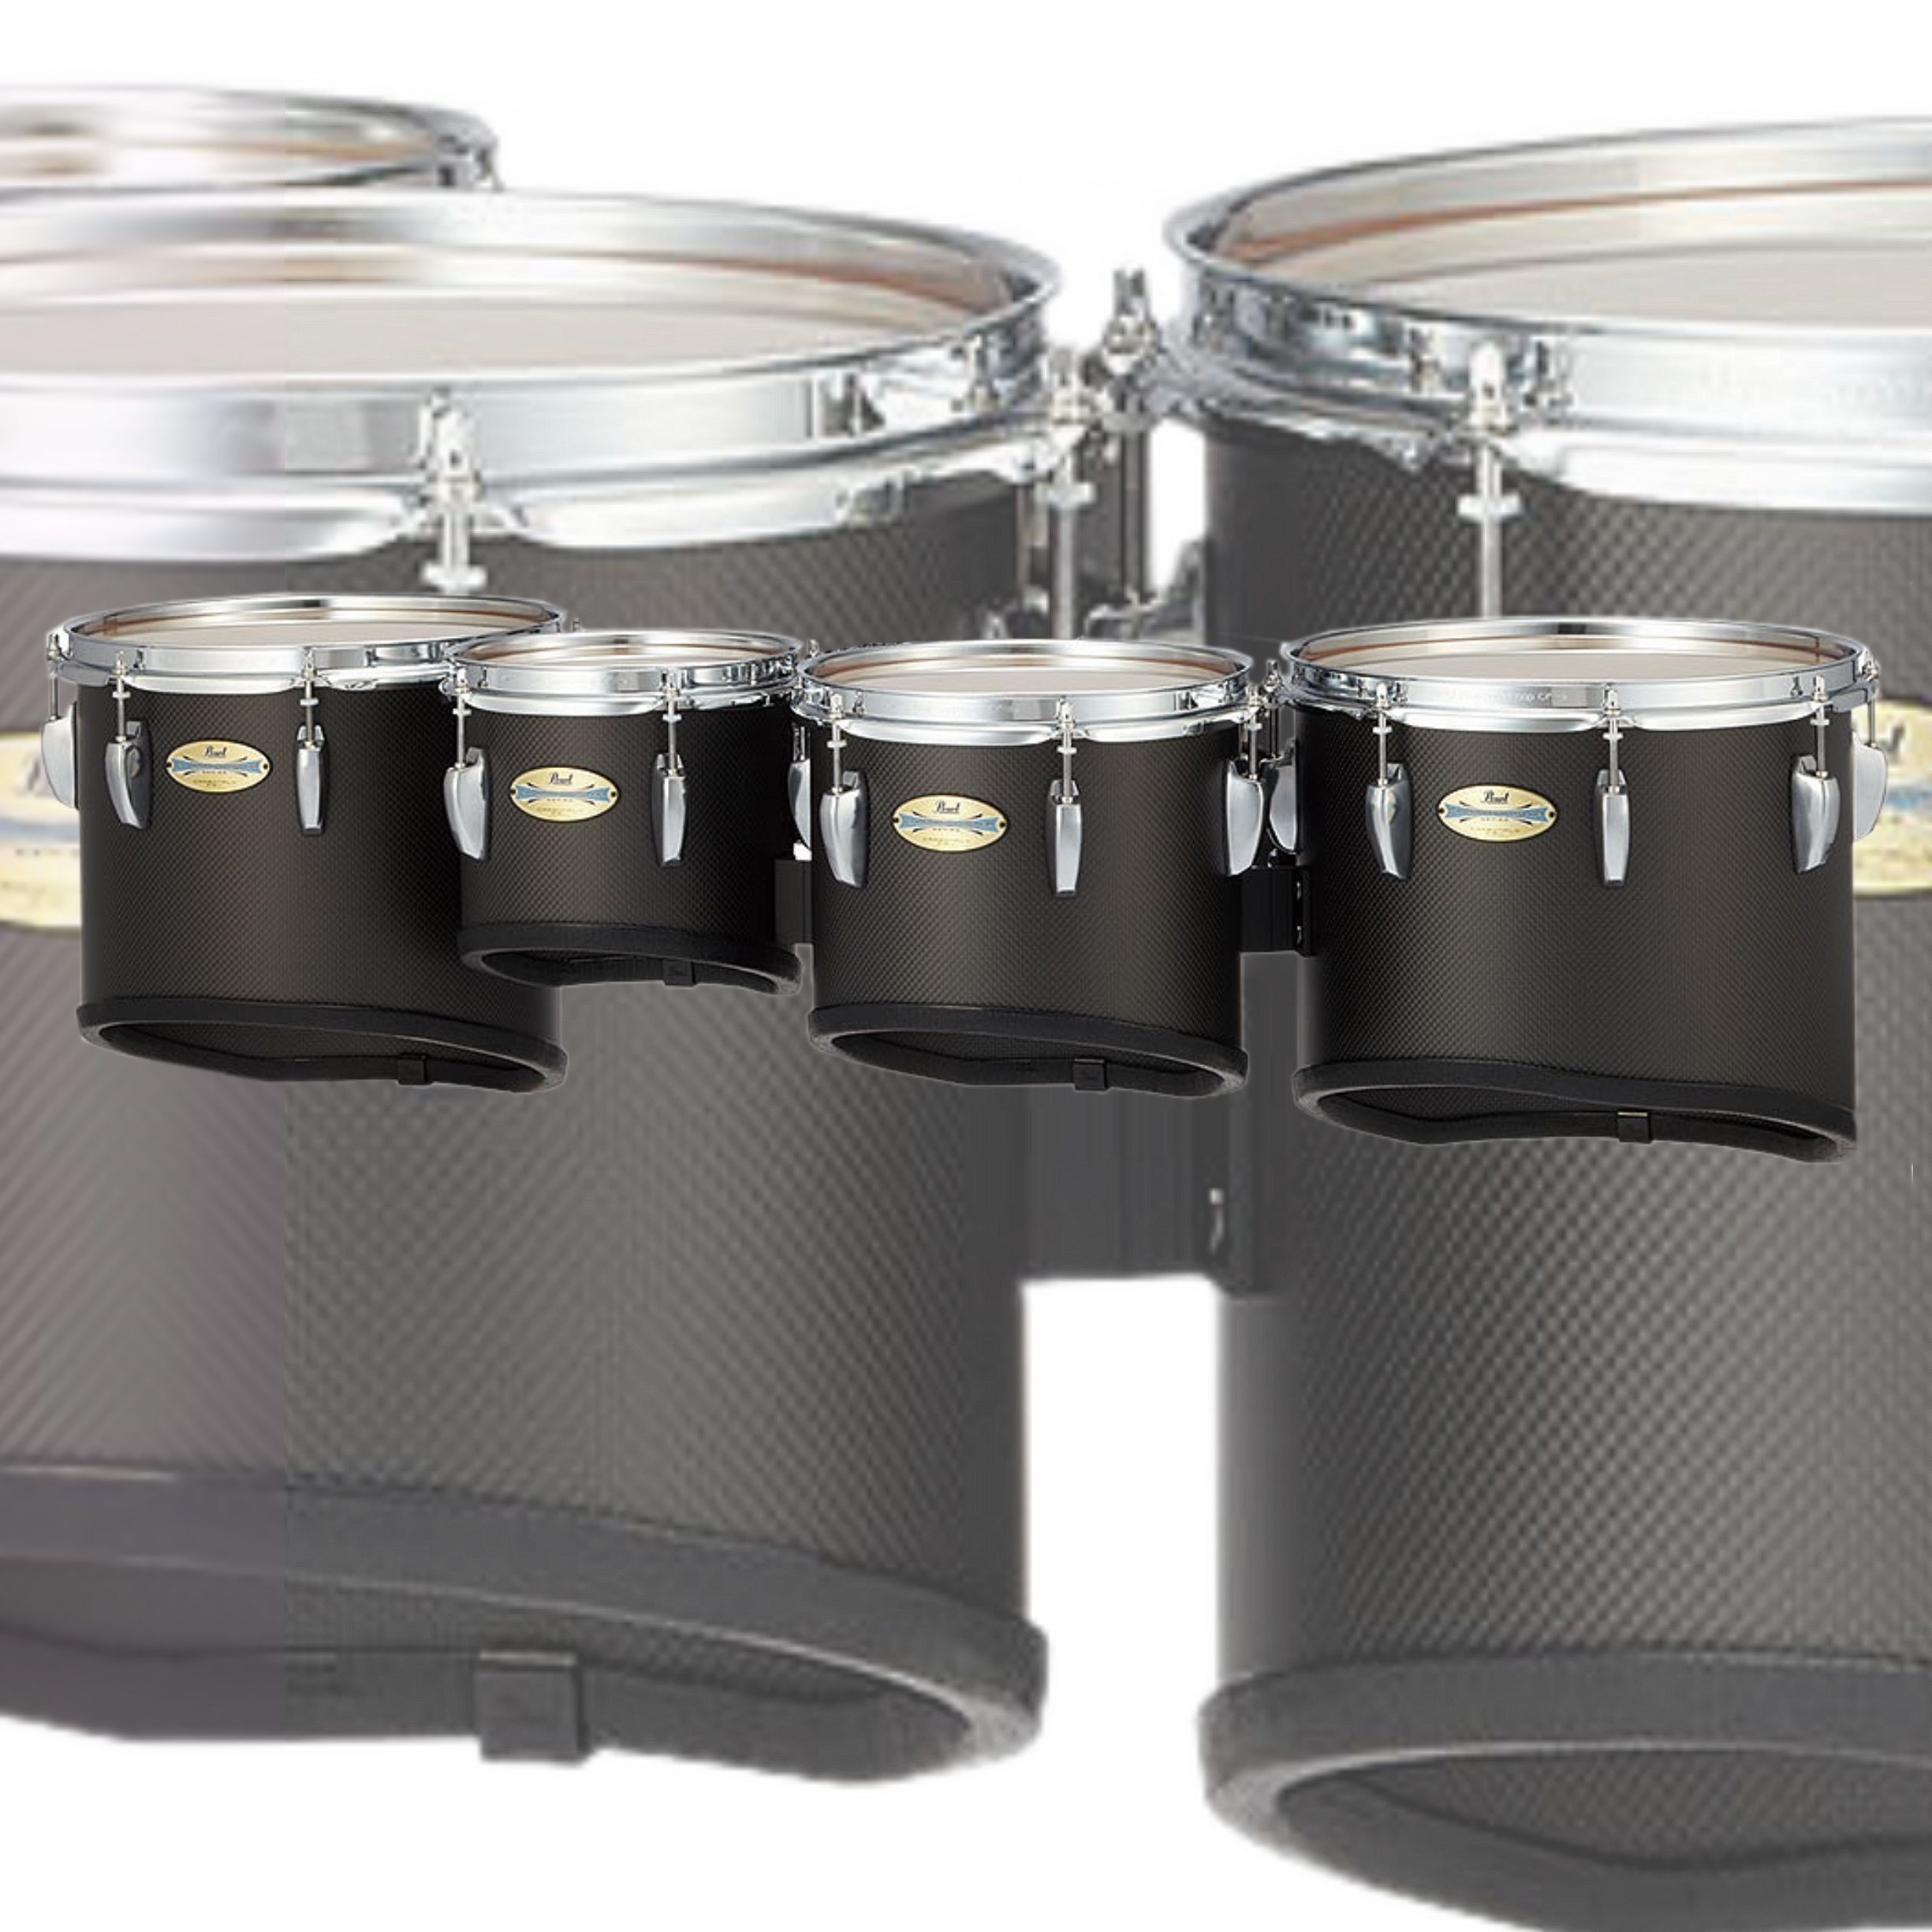 14 in 12 13 Black Silver Burst #368 Pearl Championship CarbonCore Marching Tenor Drums Quad Sonic Cut 10 